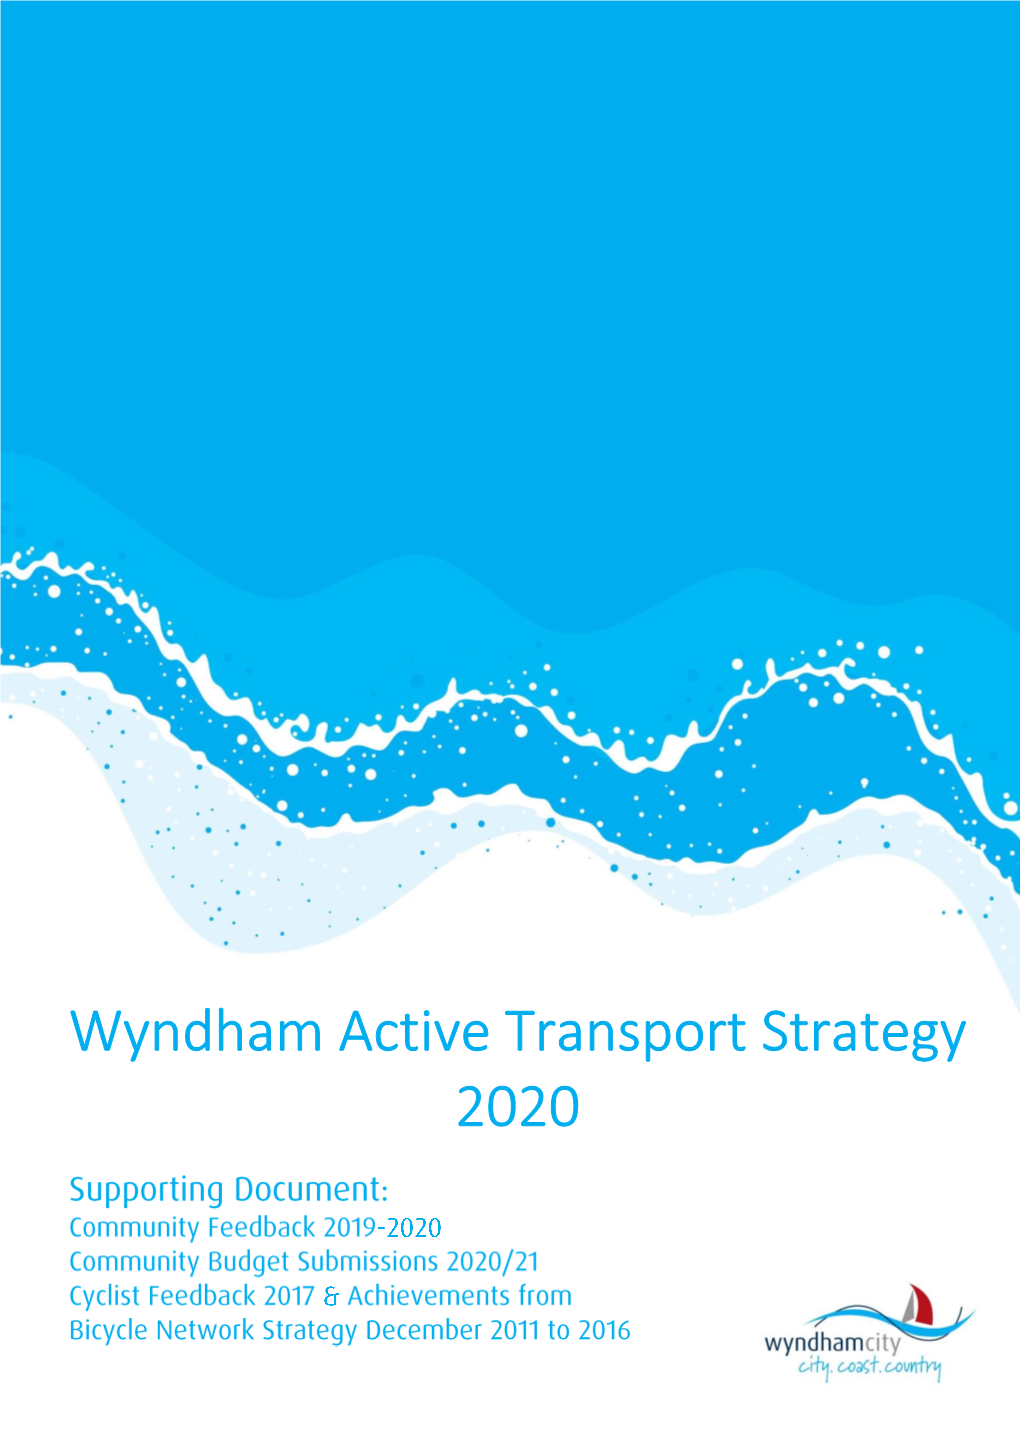 Wyndham Active Transport Strategy 2020 Wyndham City Council Has Received a Great Deal of Feedback During Development of the Wyndham Active Transport Strategy